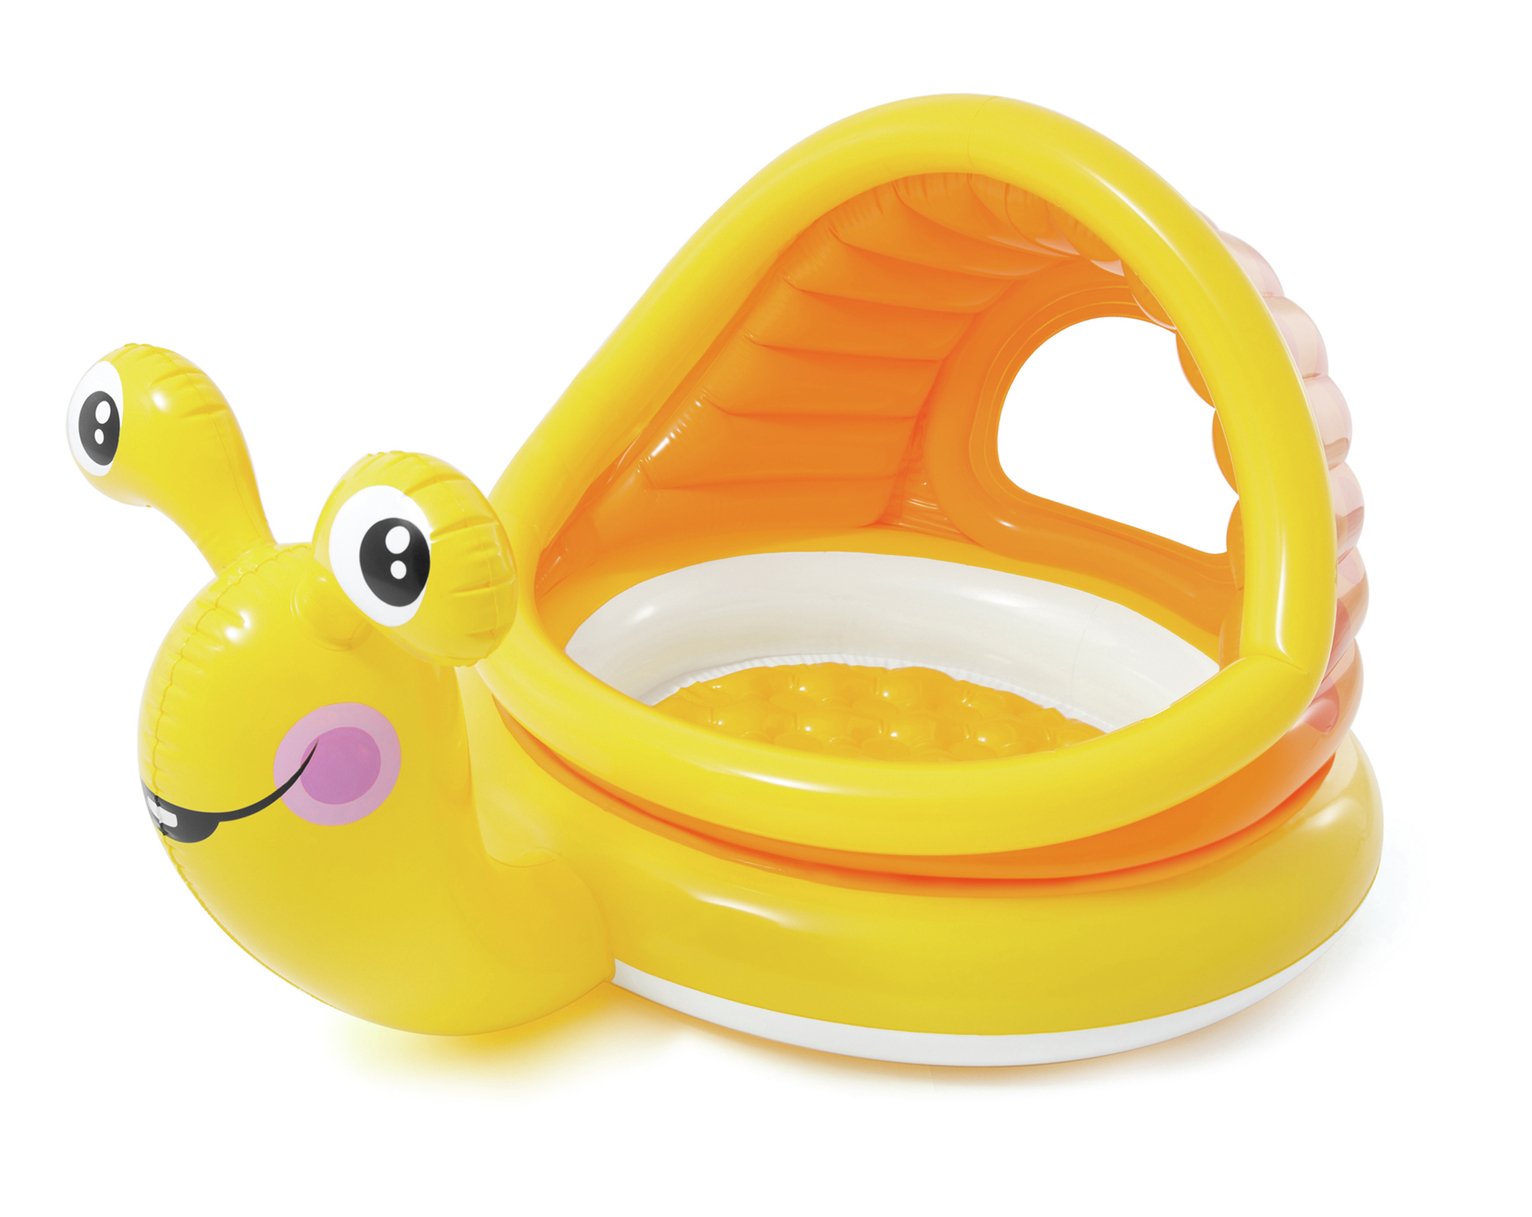 Intex 5ft Lazy Snail Baby Paddling Pool With Shade Review